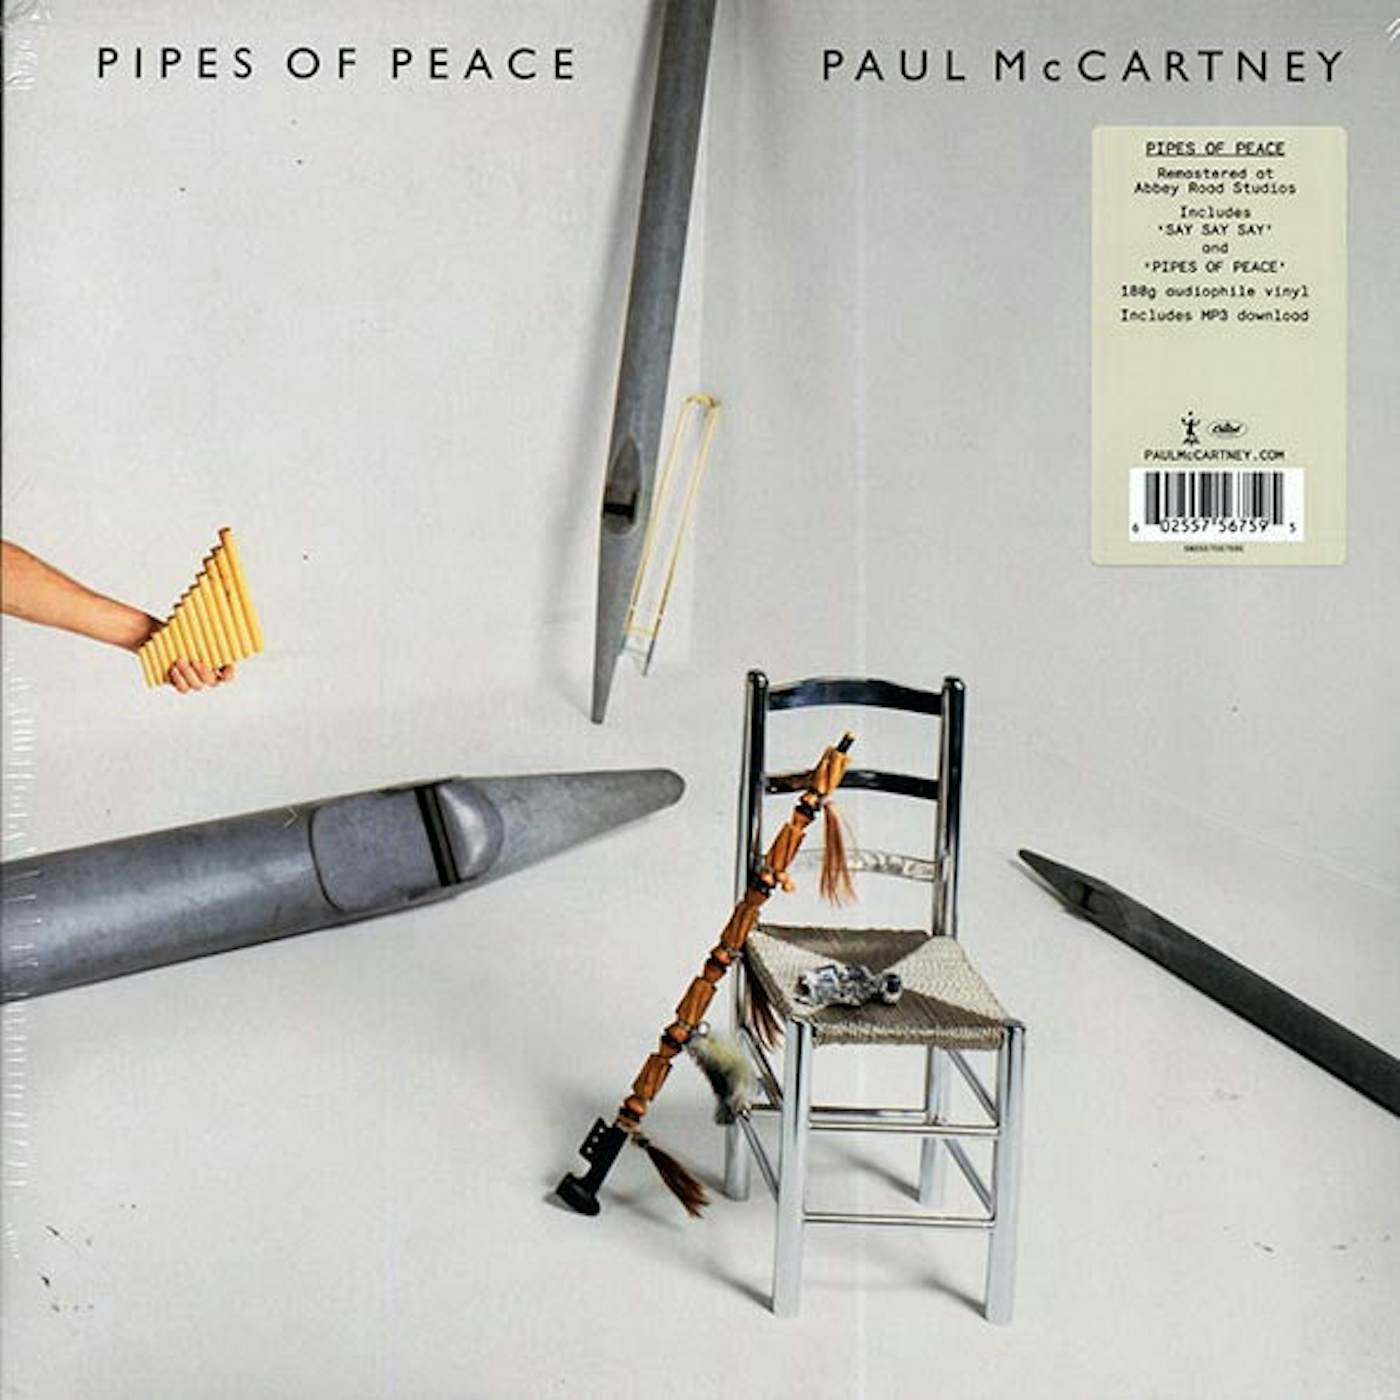 Paul McCartney  LP -  Pipes Of Peace (incl. mp3) (180g) (remastered) (audiophile) (Vinyl)